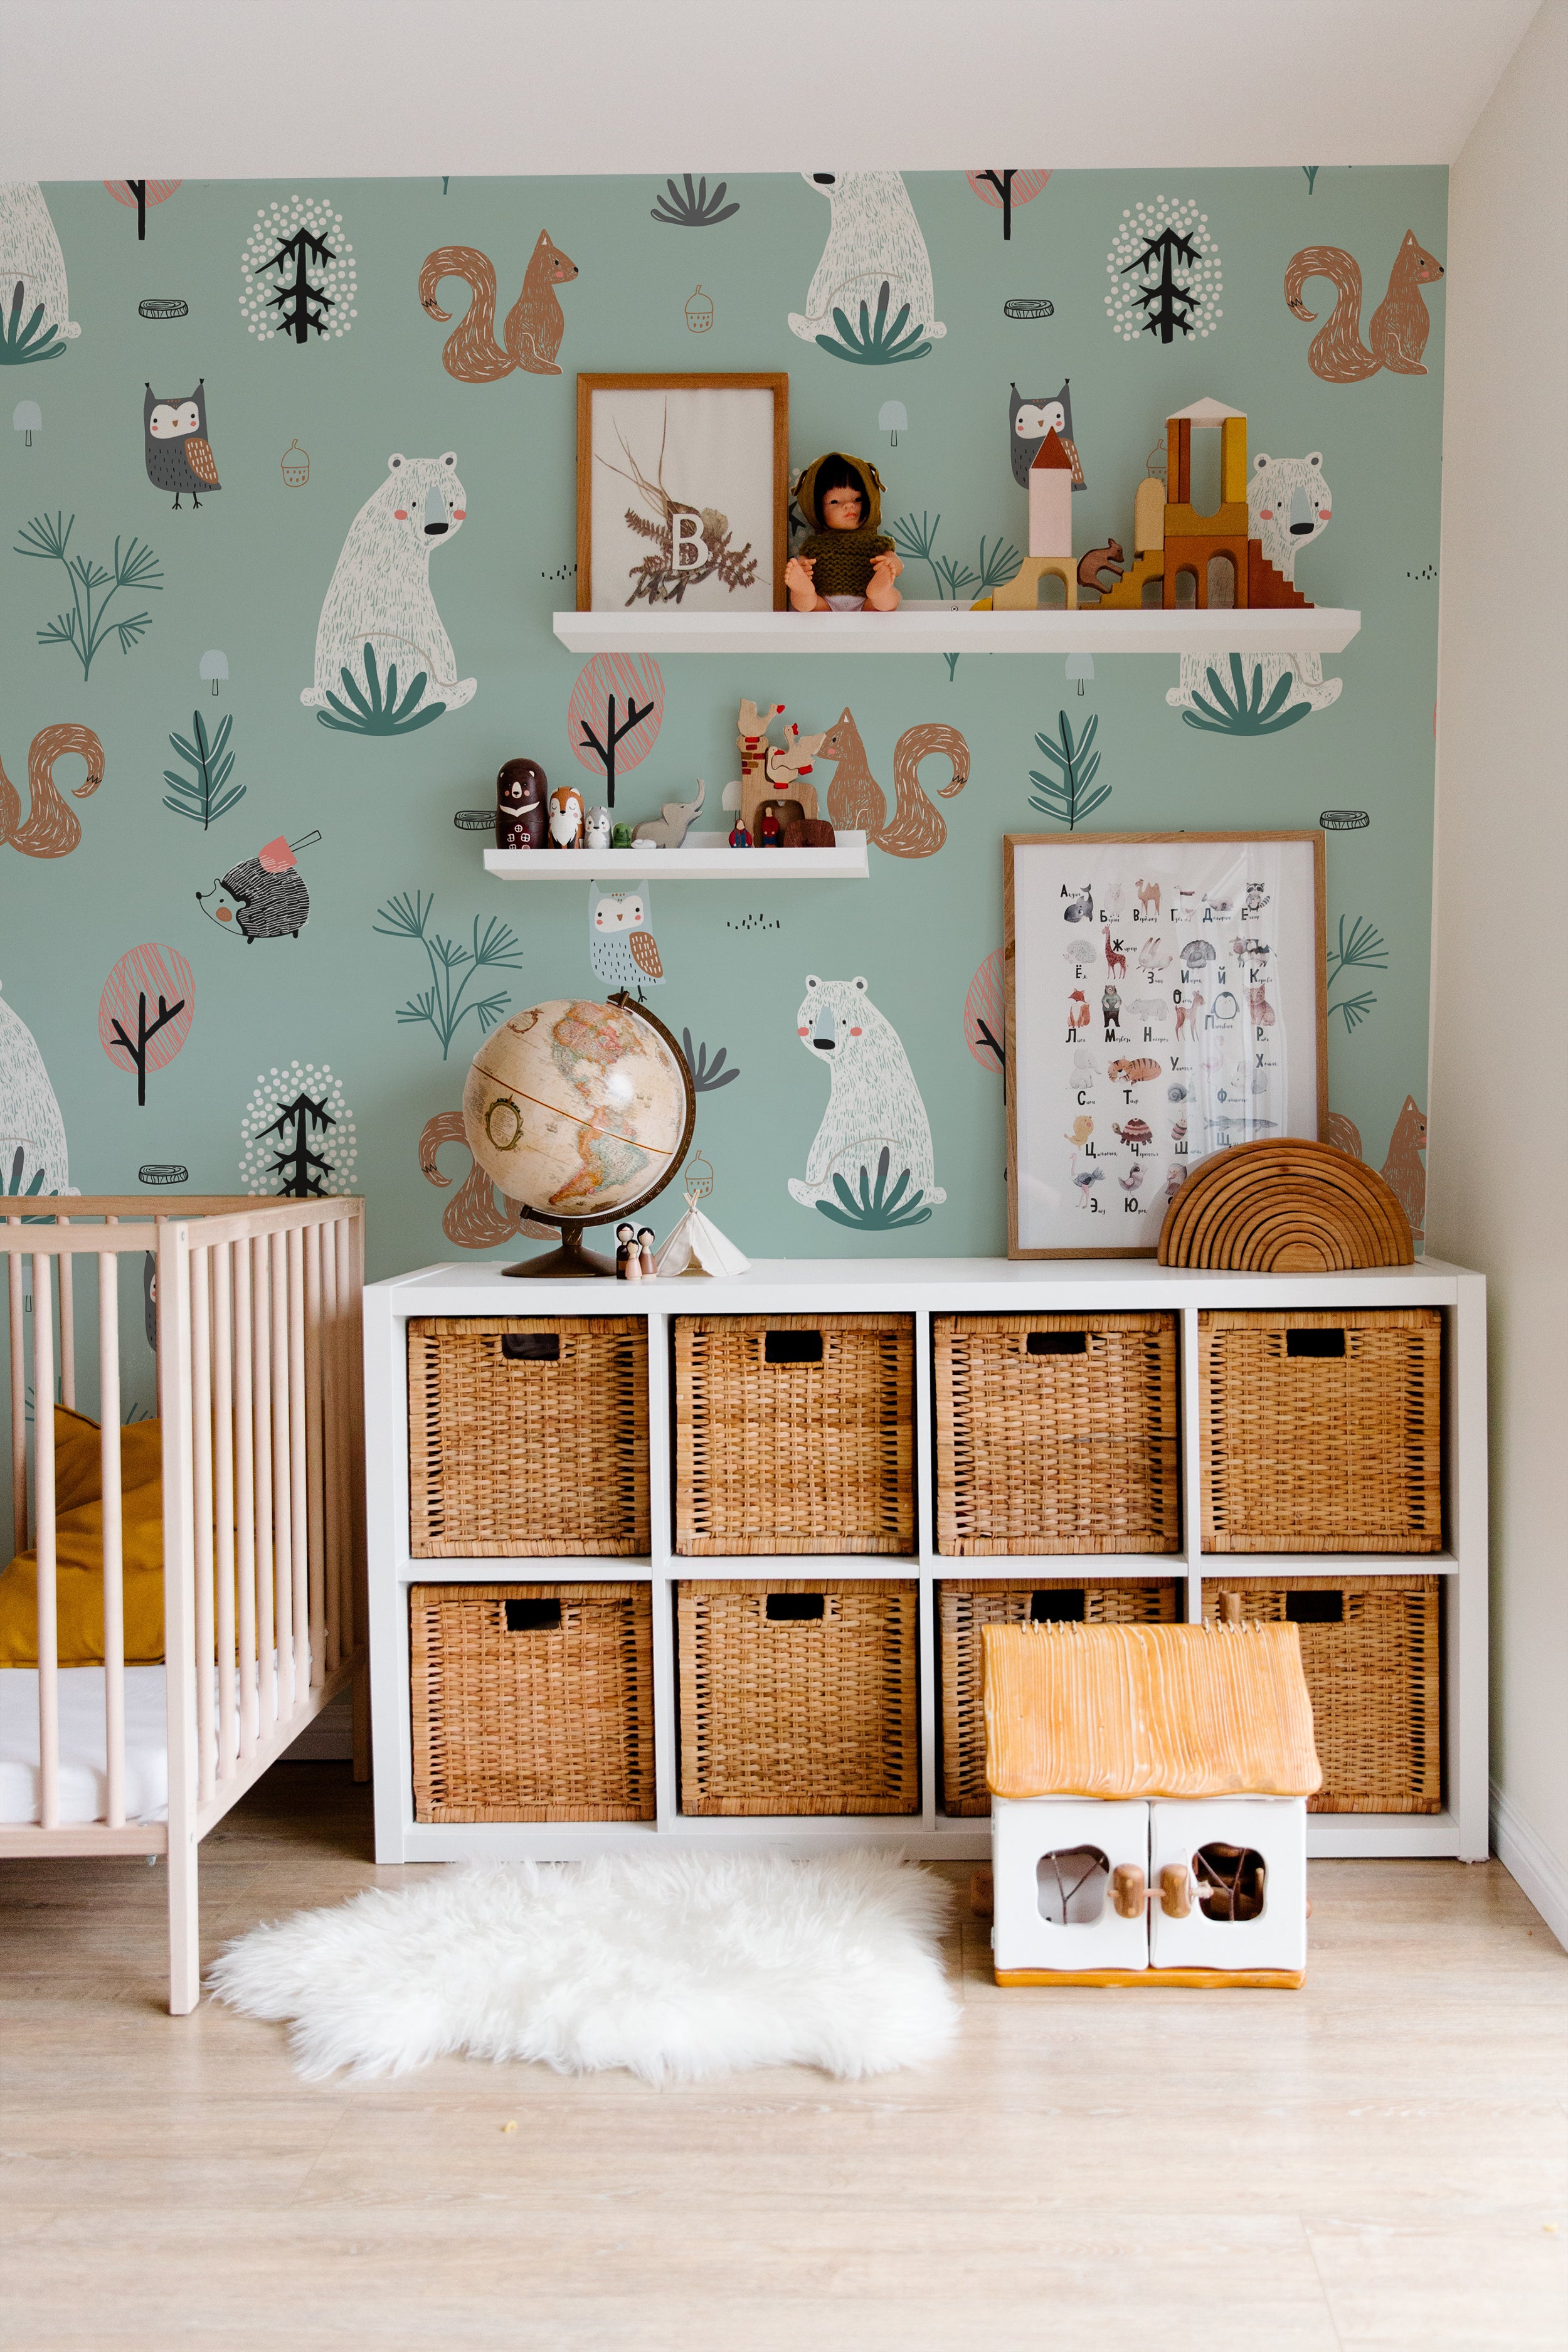 This nursery room is beautifully adorned with "Kids Wallpaper - Forest Critters - 50 inches." The wallpaper features large prints of friendly woodland creatures such as bears, owls, and squirrels in a whimsical forest setting. The room is furnished with a white crib, rattan storage baskets, and playful decor, creating a charming and inviting space for children.